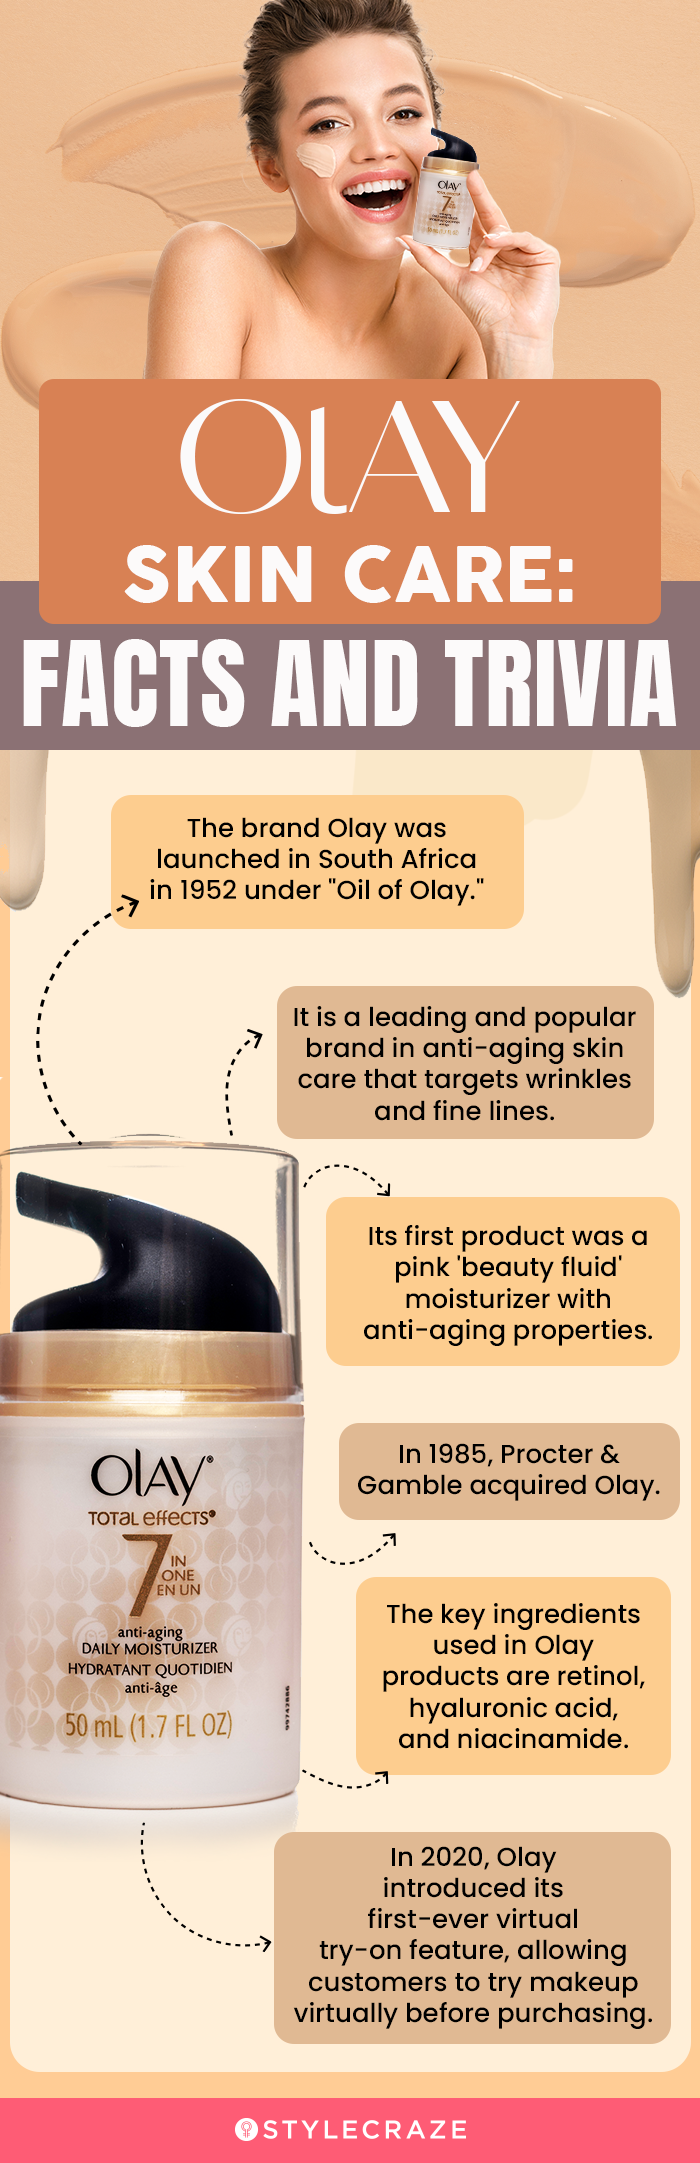 Olay Skincare Facts & Trivia (infographic)